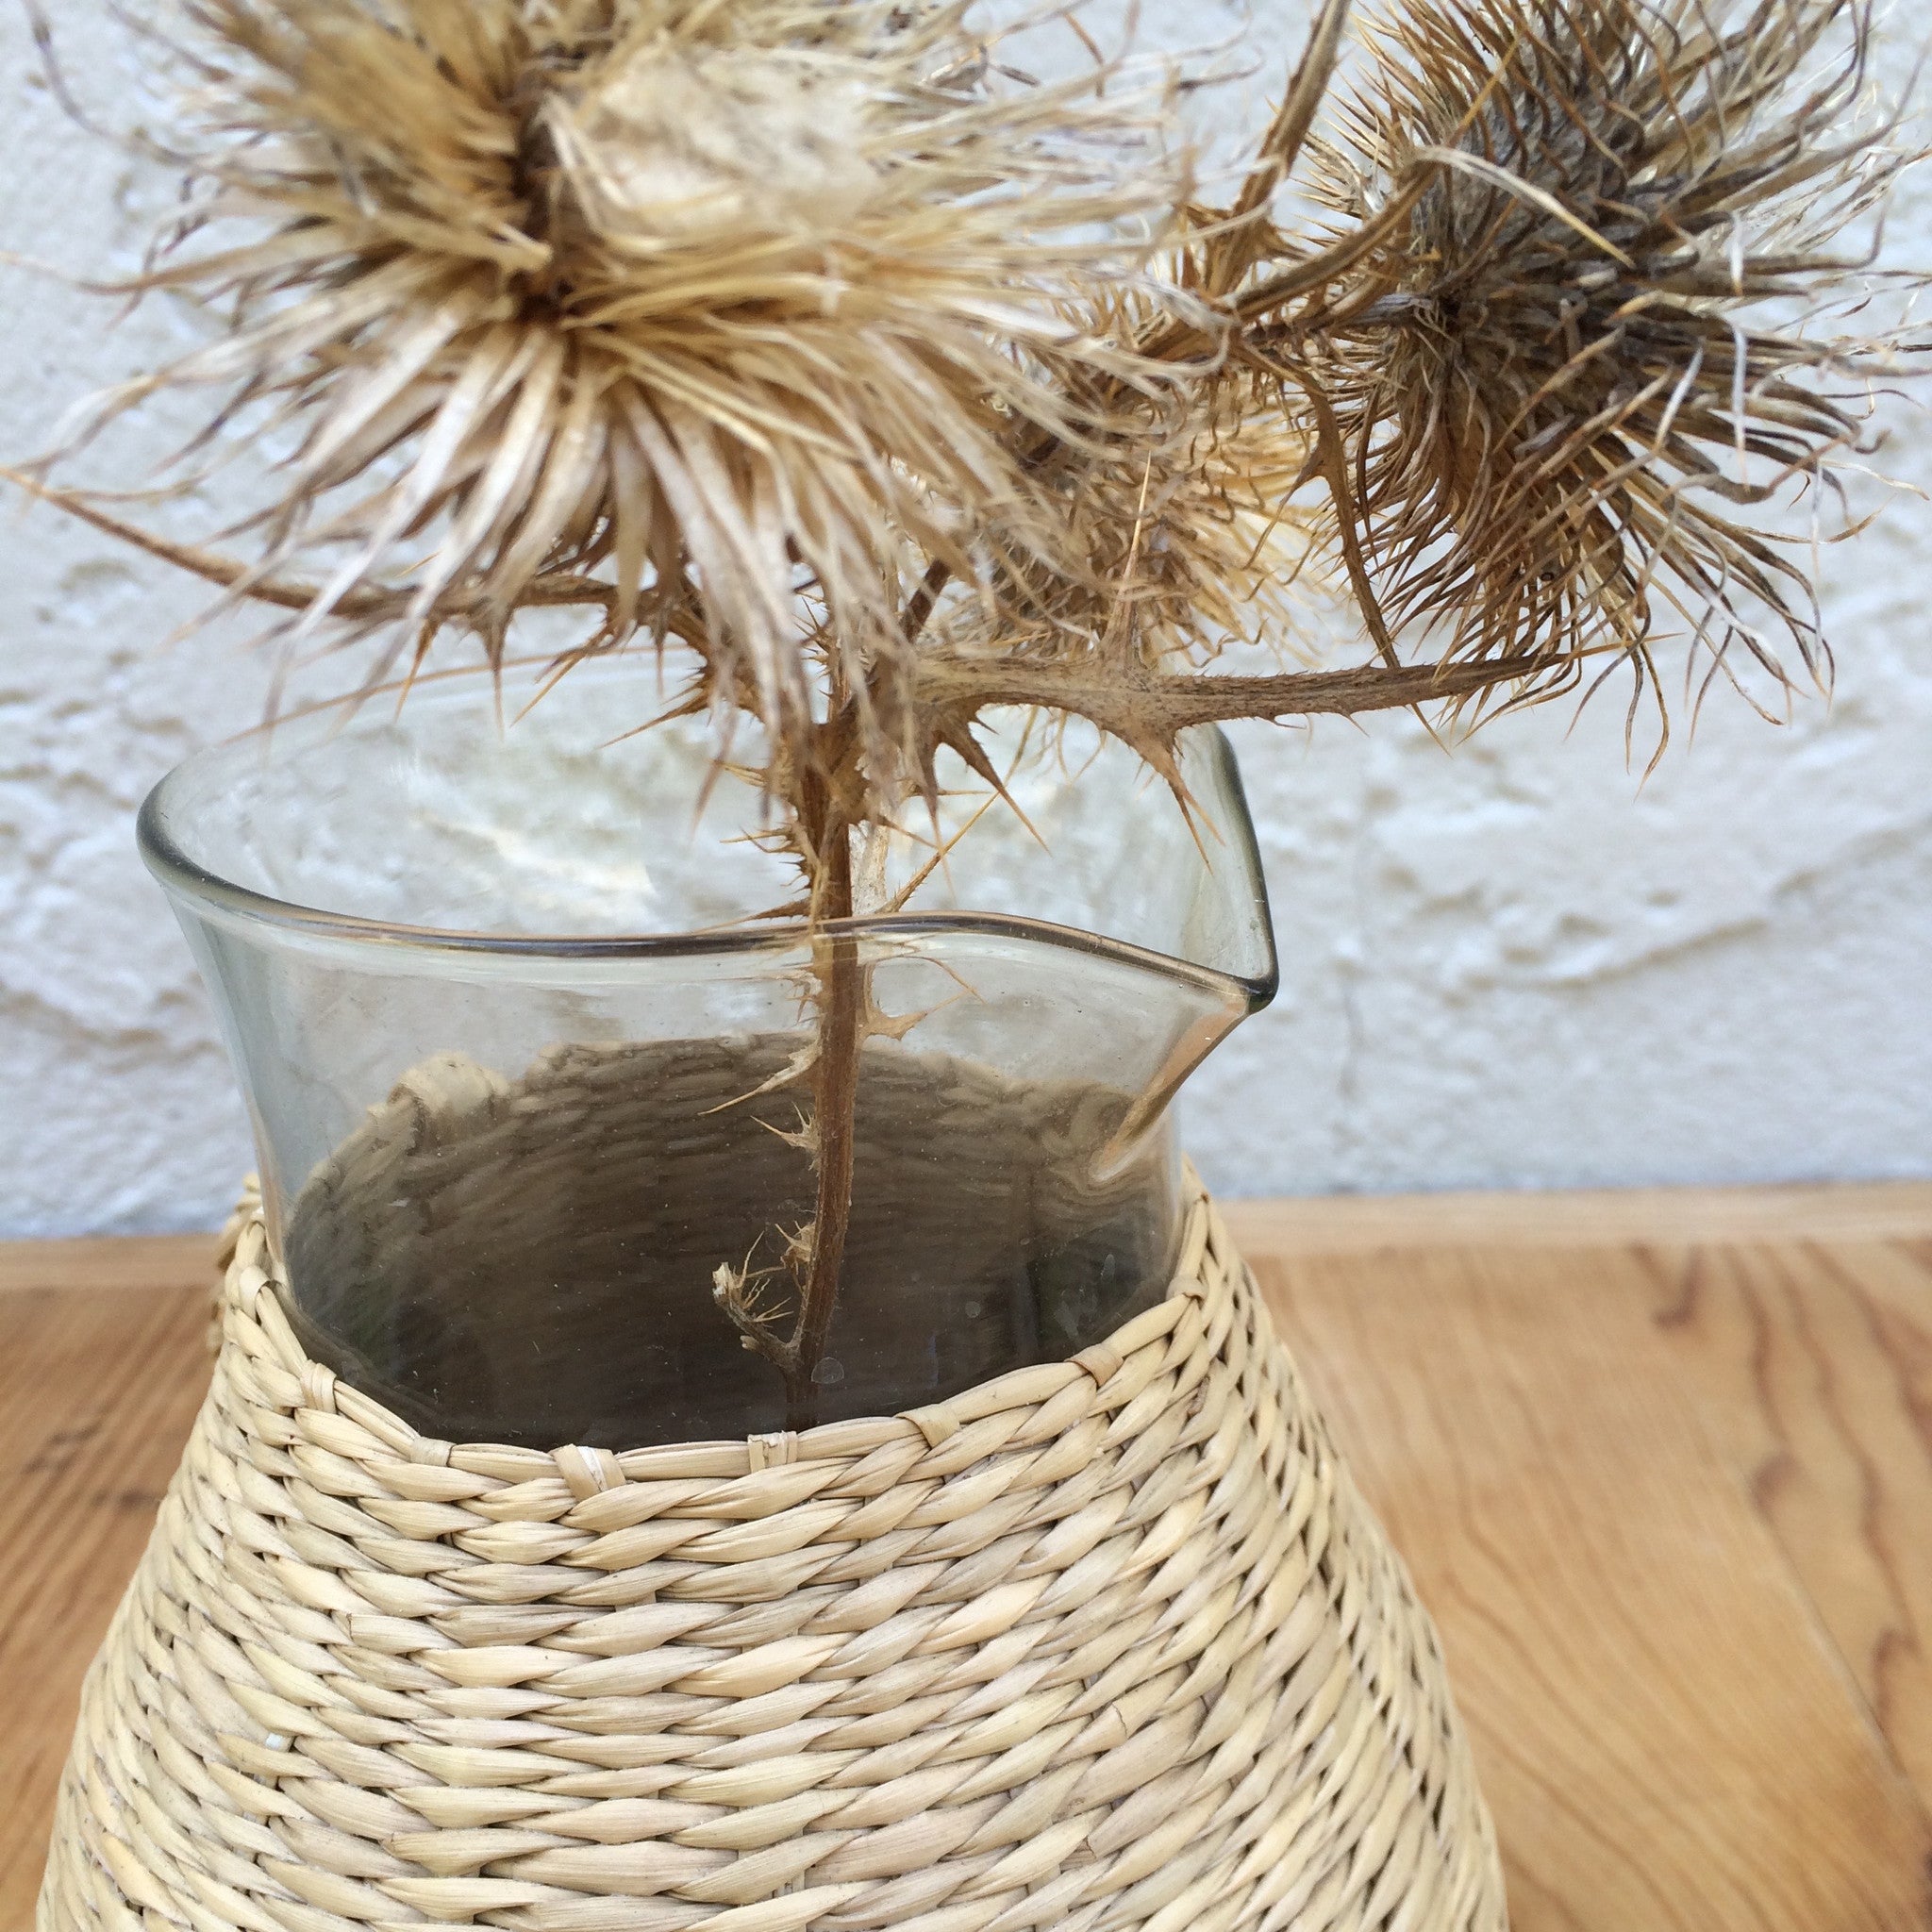 wicker and glass pitcher